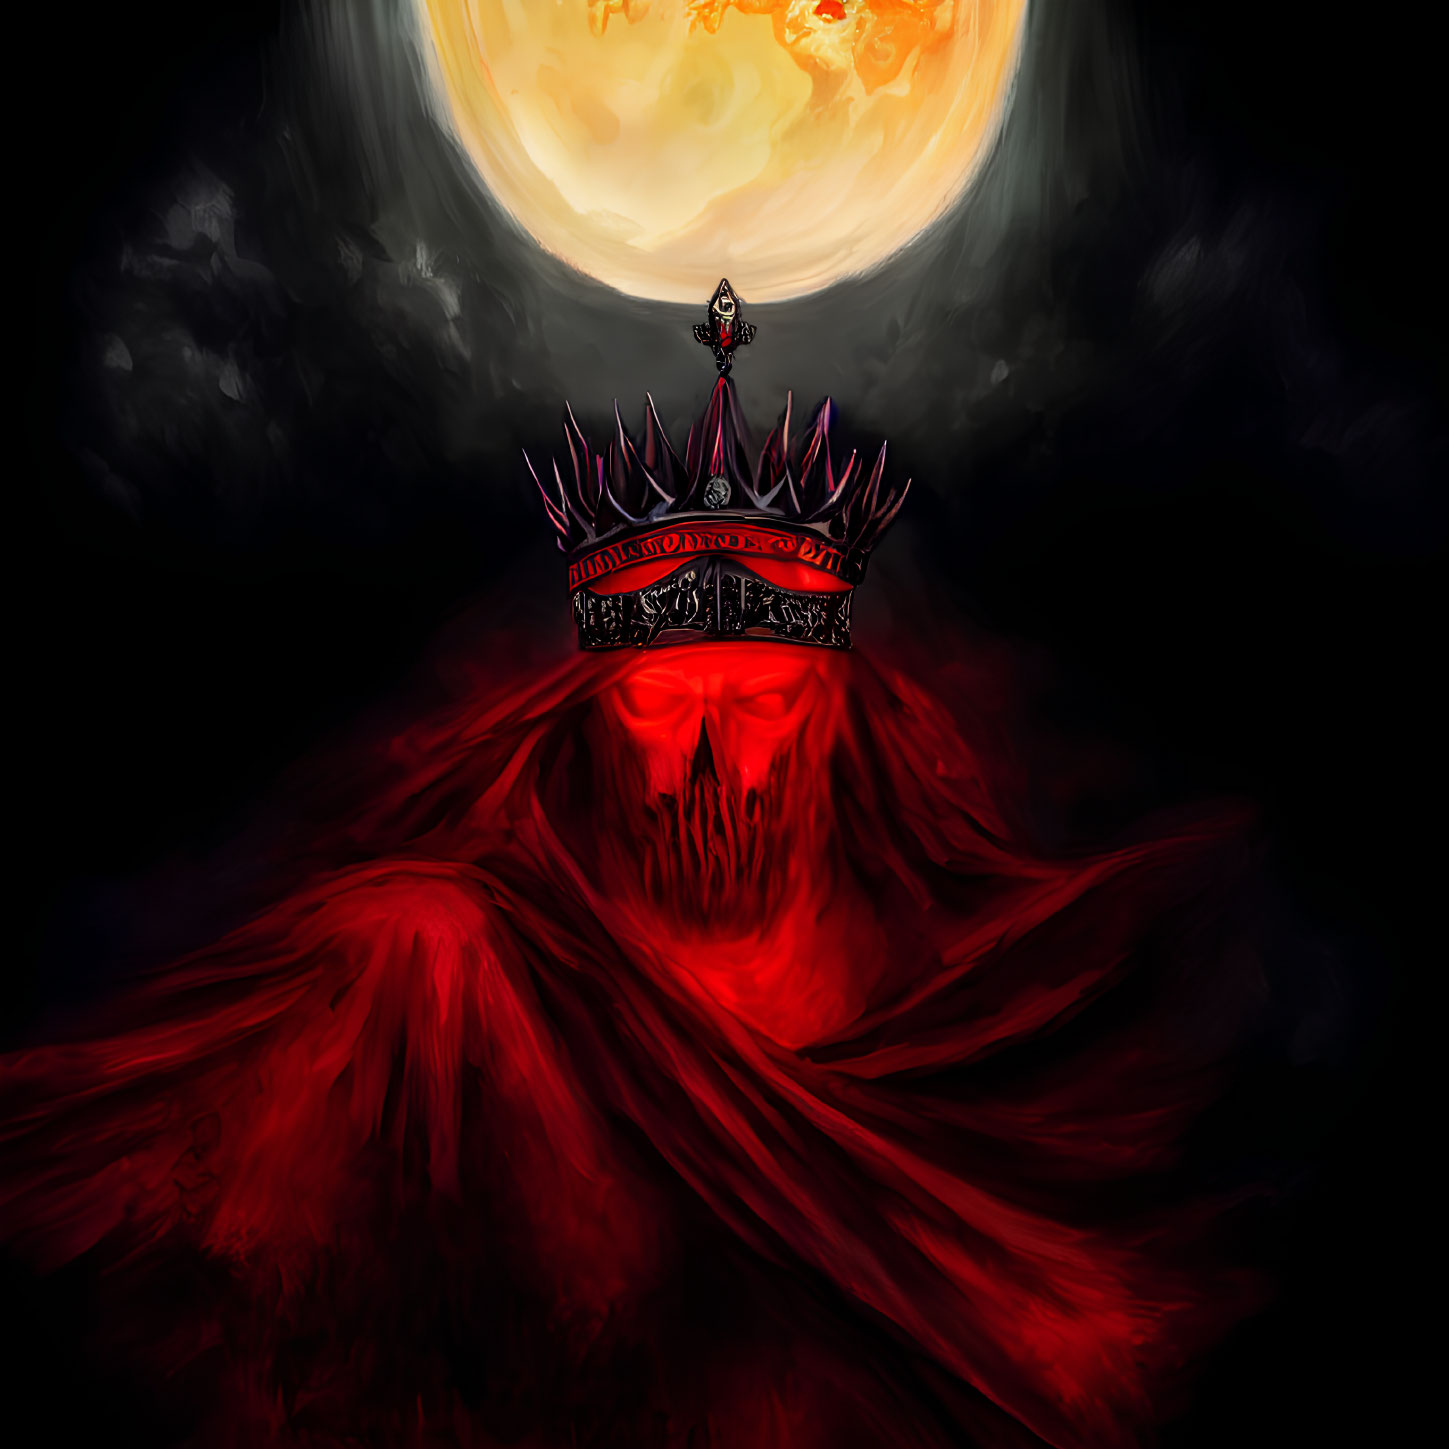 Mysterious figure in red cloak with spiky crown under red moon